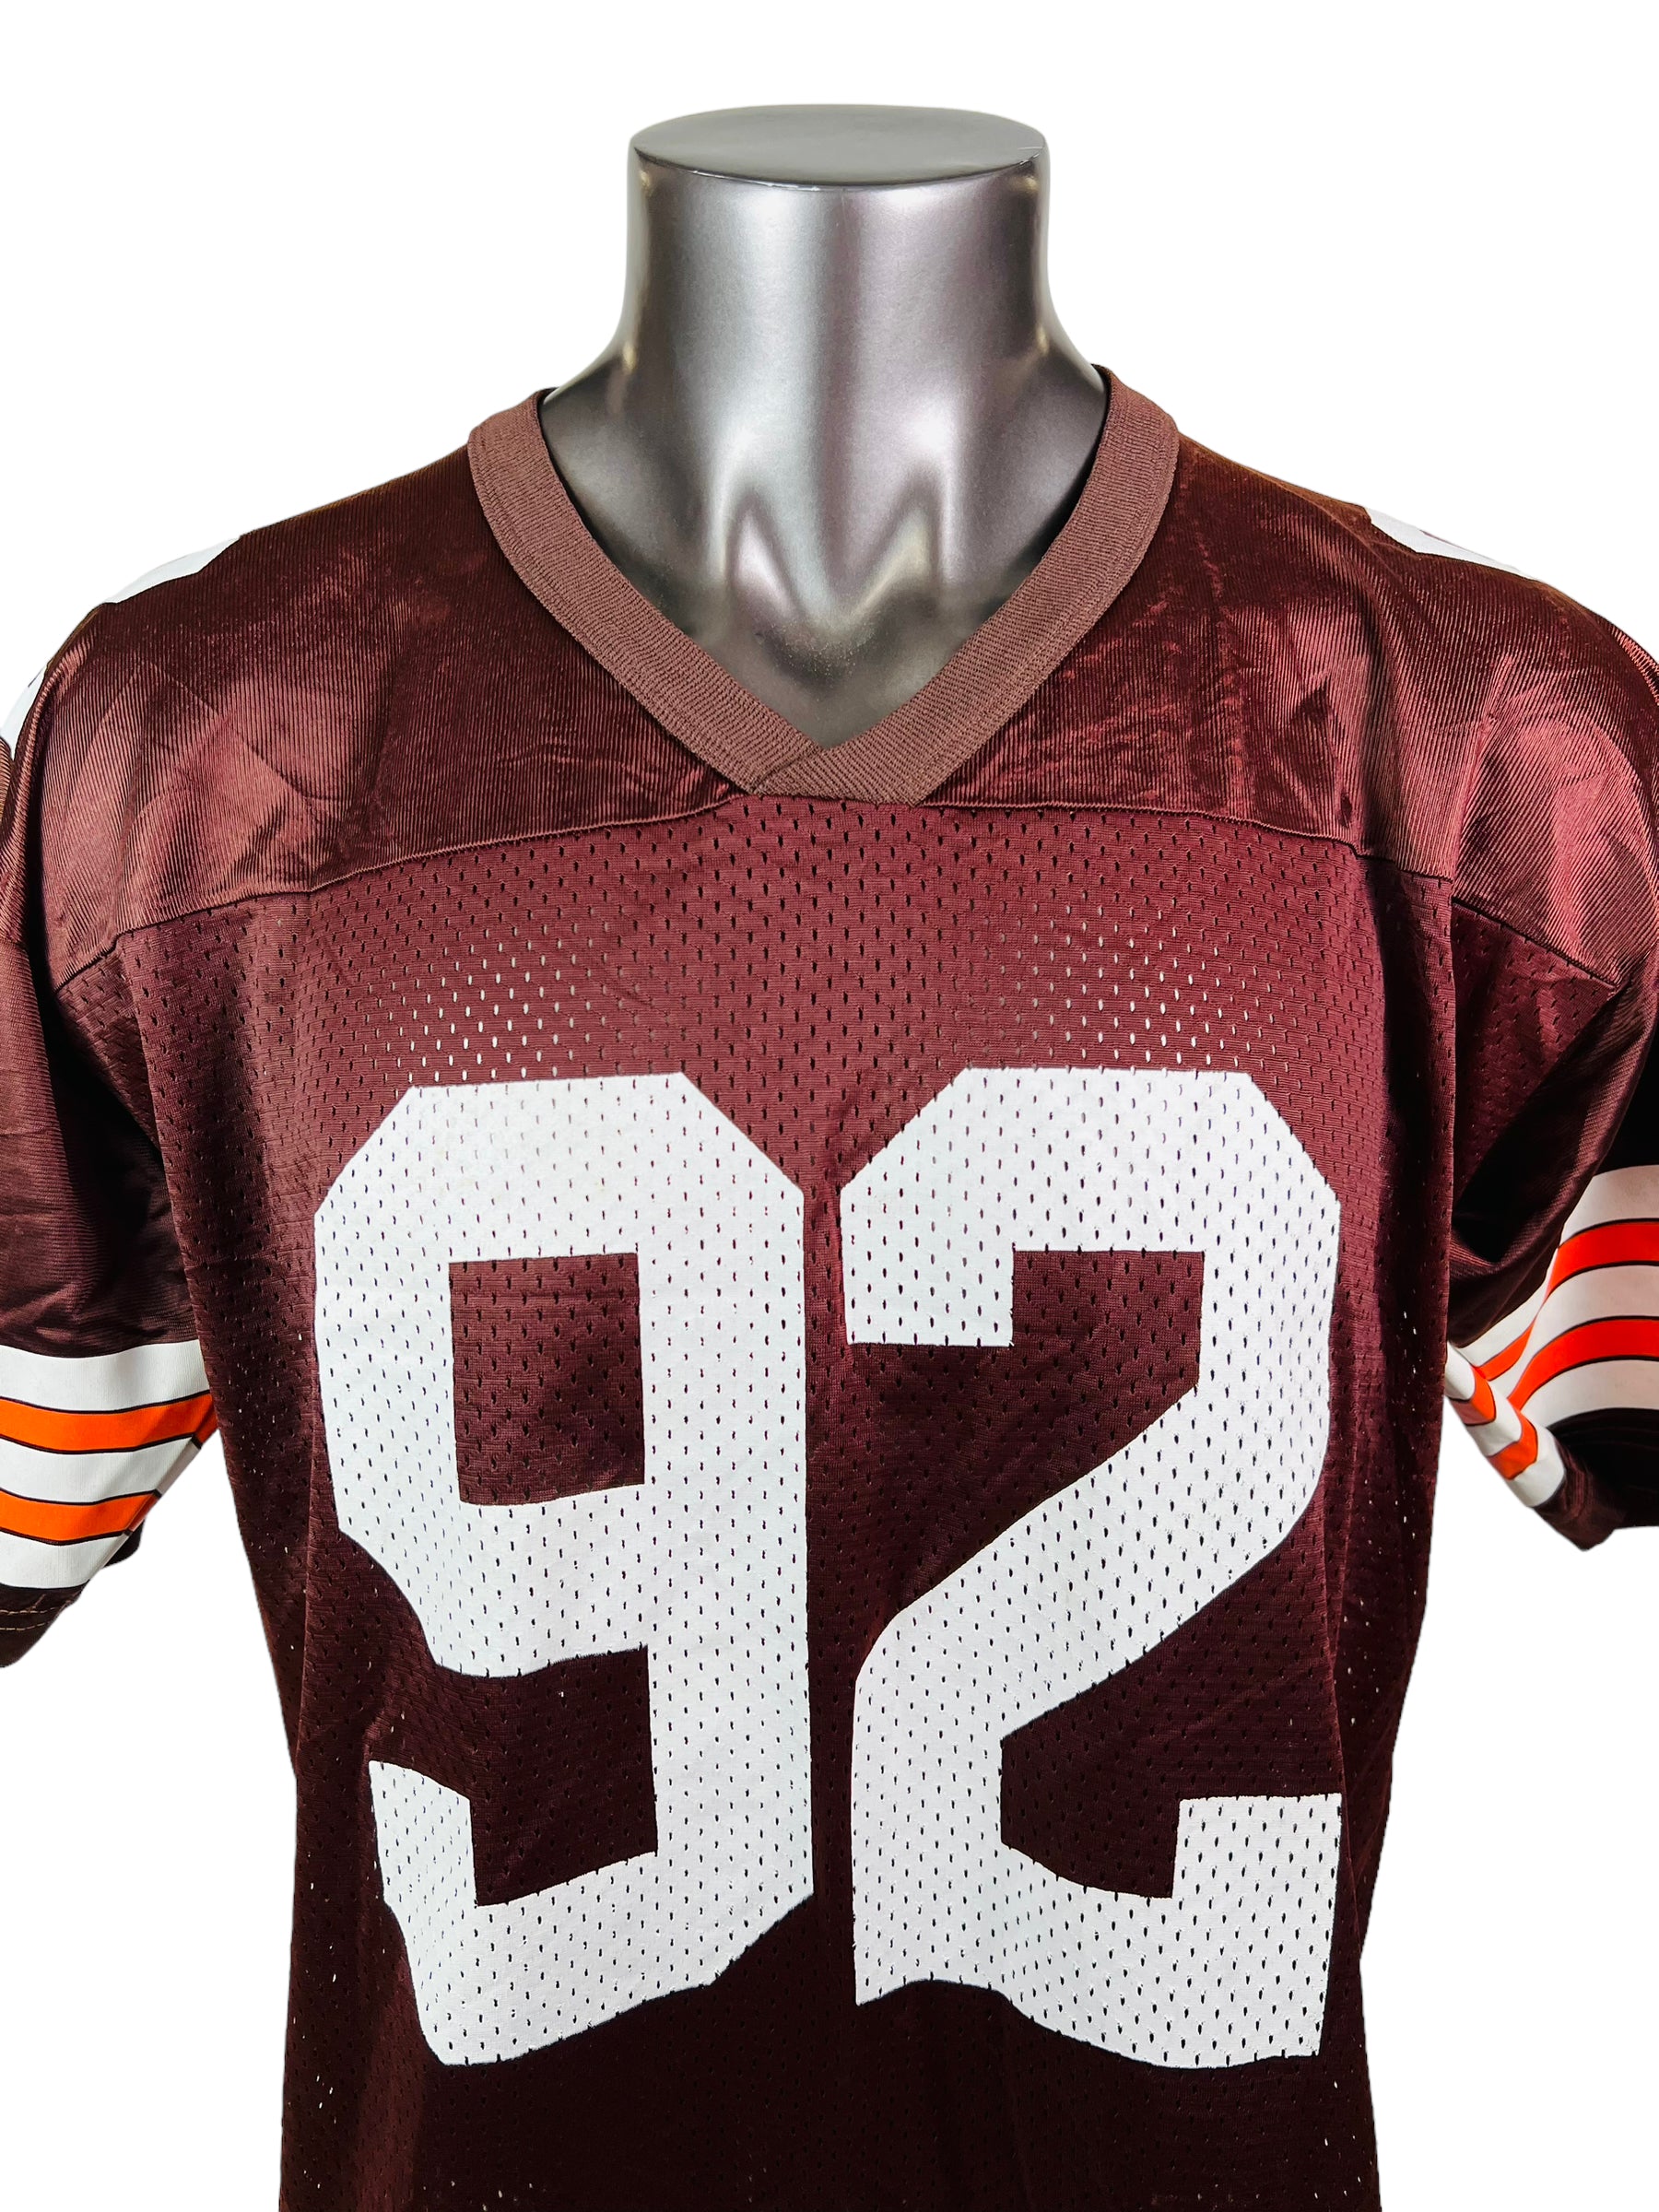 retro cleveland browns jersey